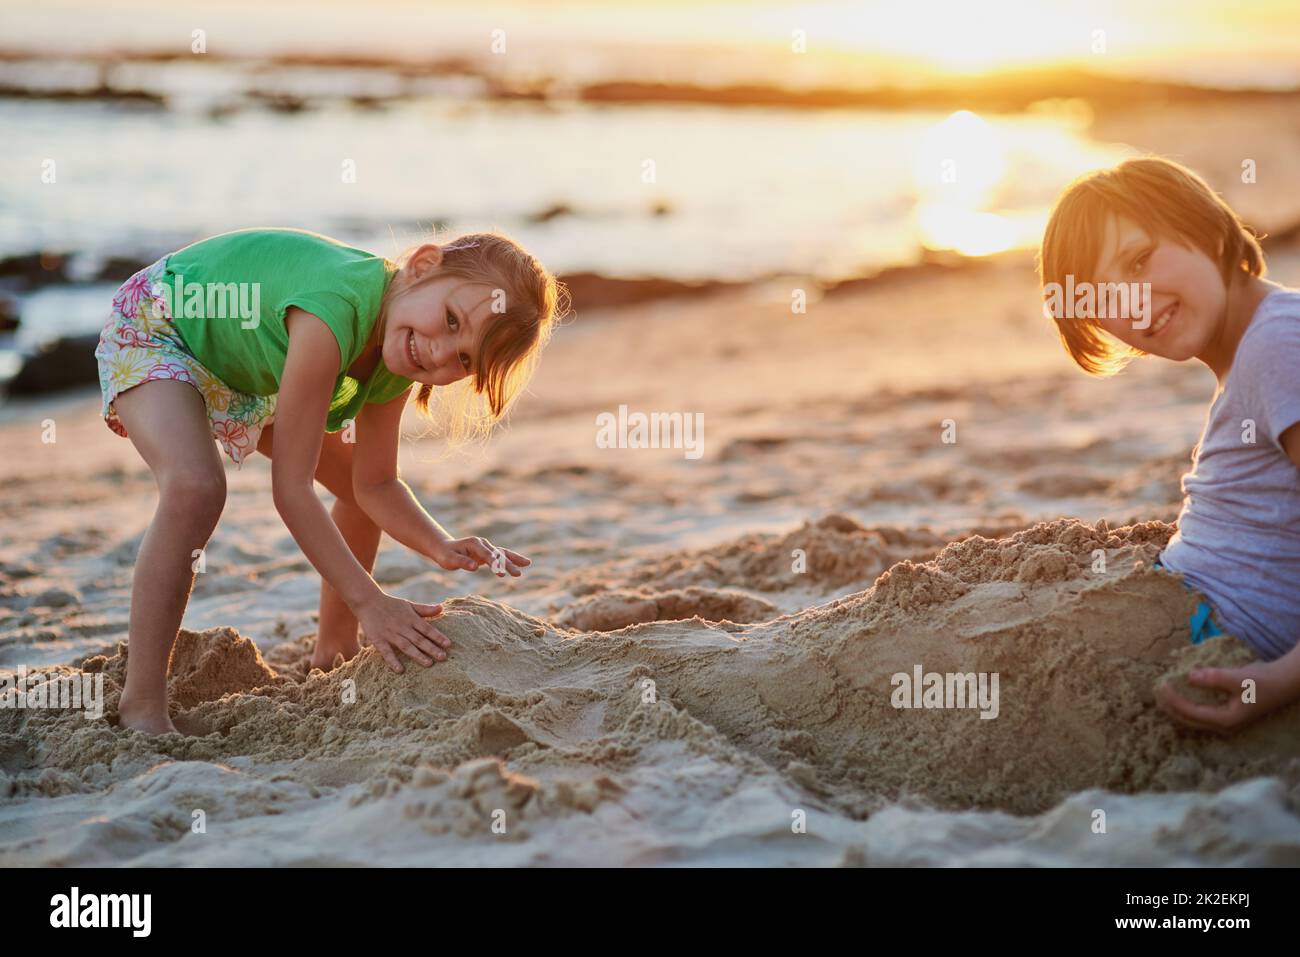 Were going to build the biggest sandcastle ever. Portrait of two young siblings playing together in the sand at the beach. Stock Photo